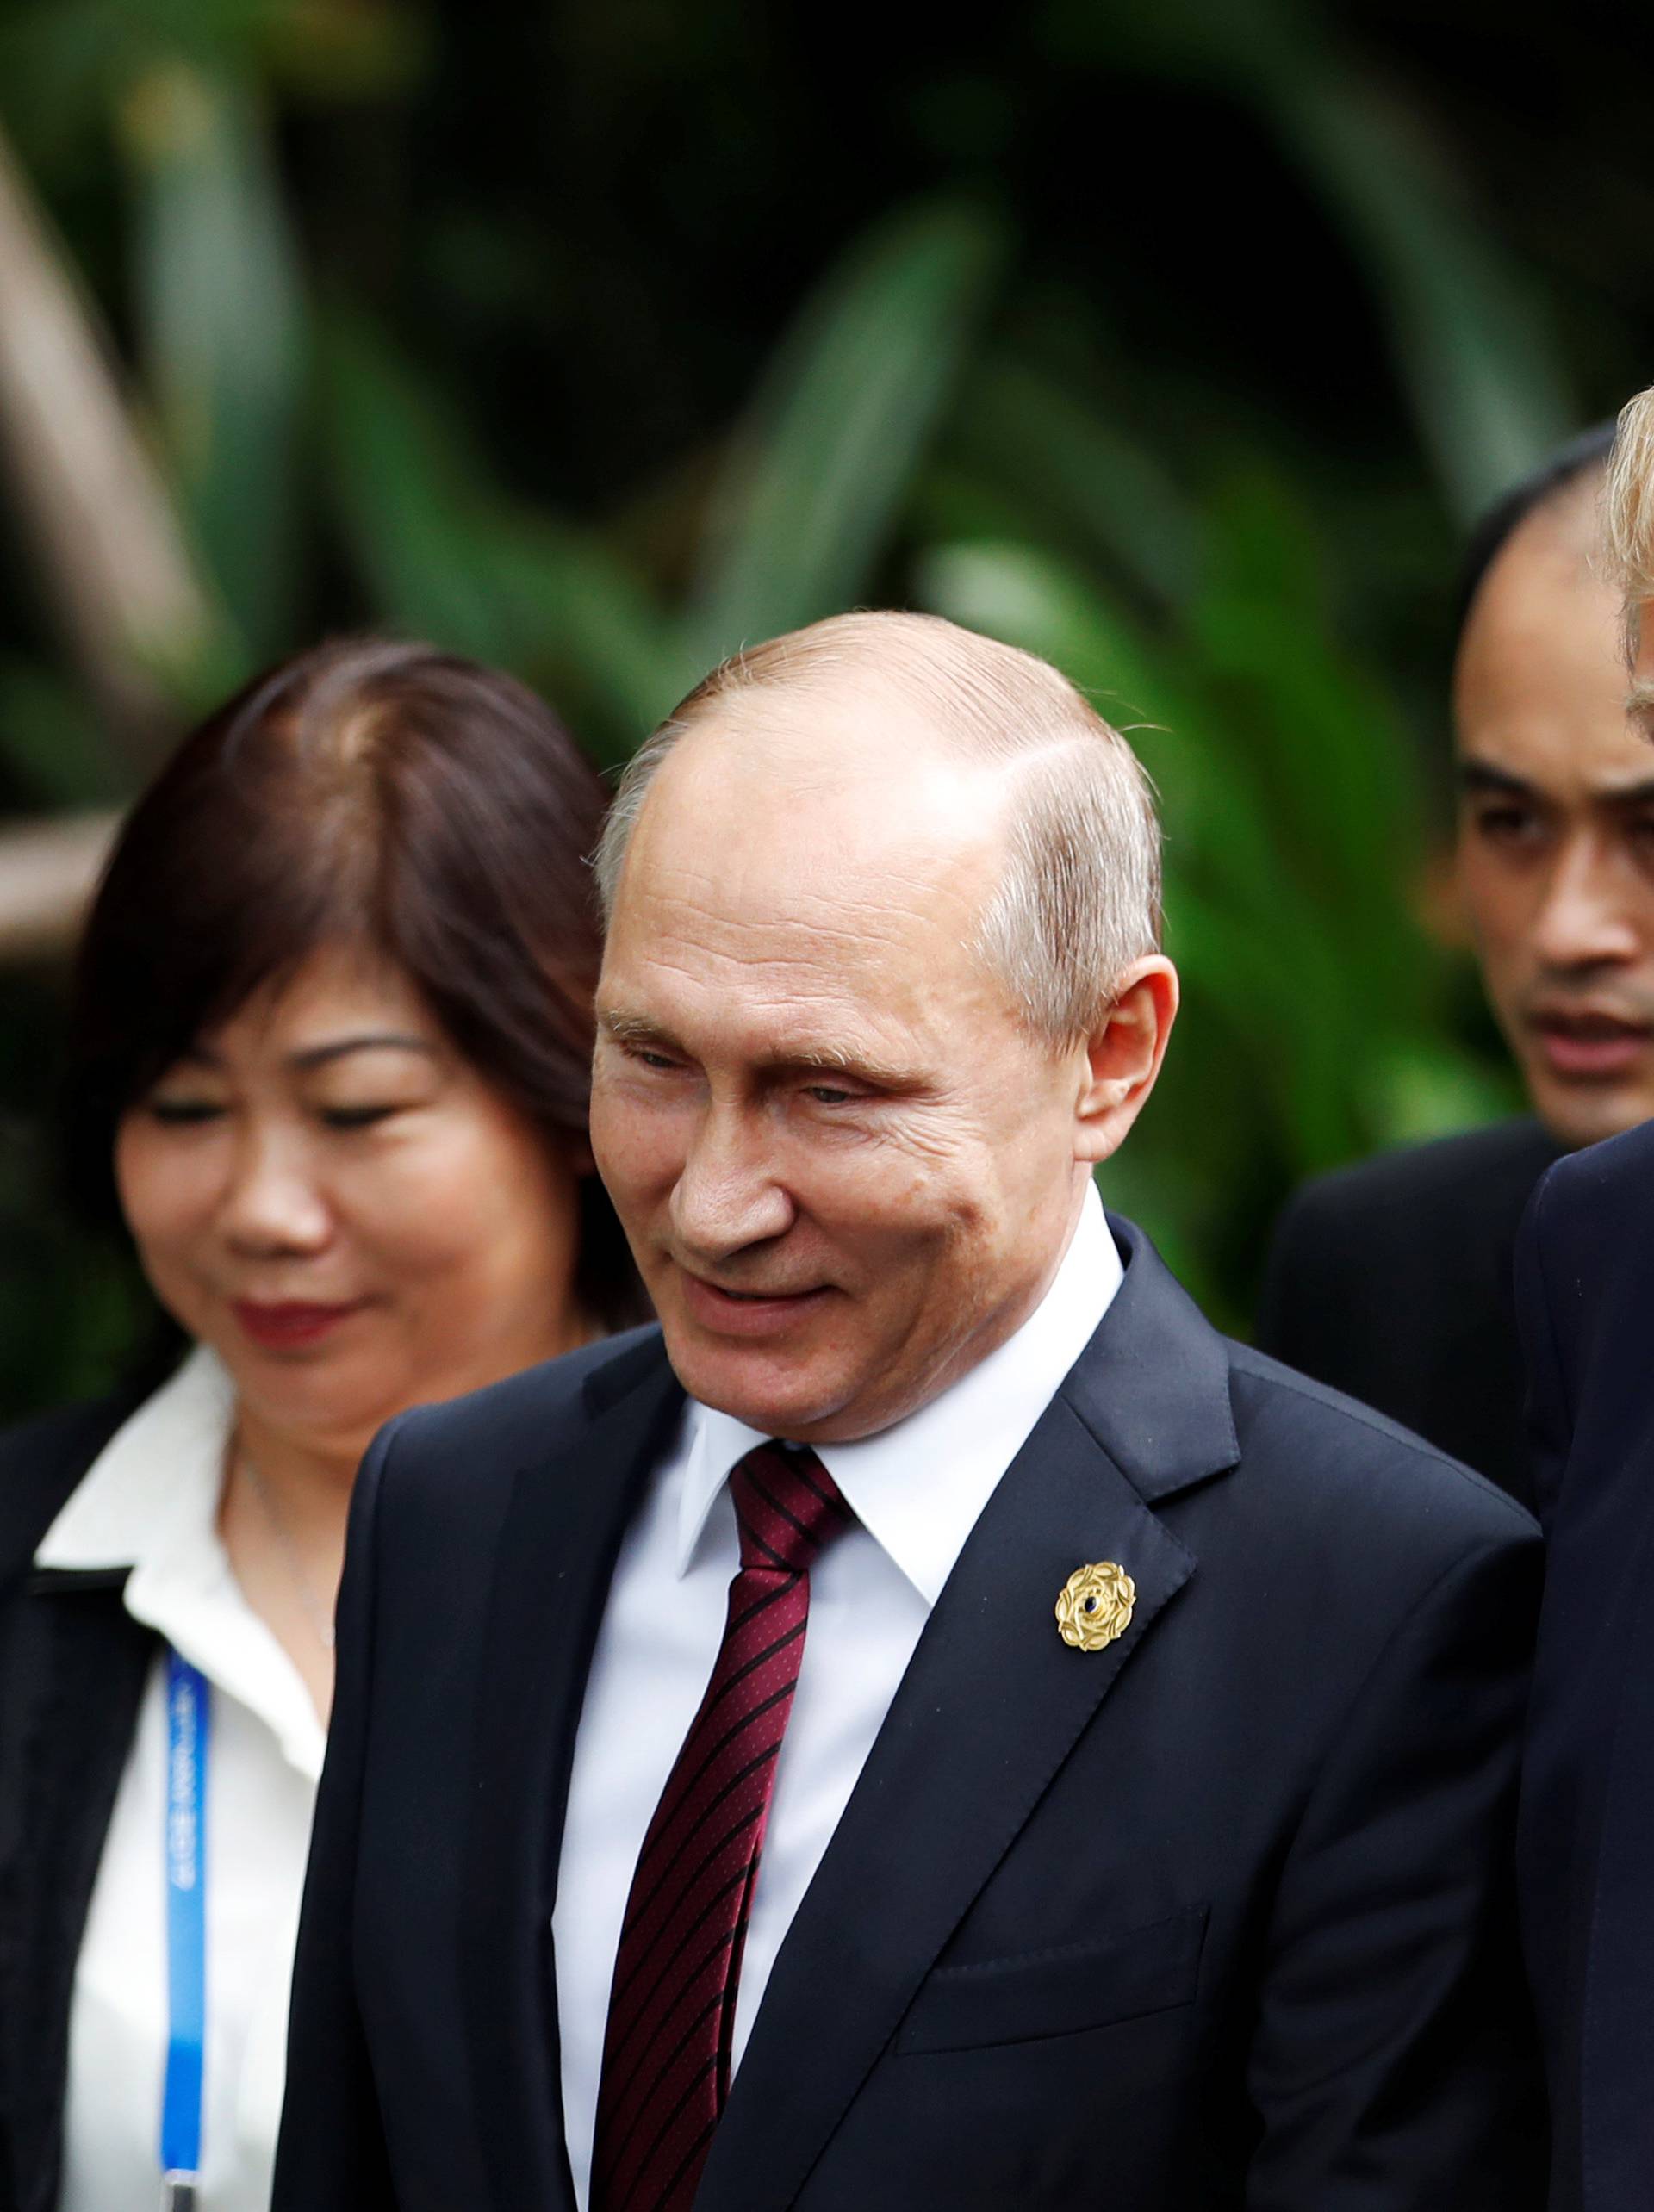 U.S. President Donald Trump and Russia's President Vladimir Putin attend the family photo session at the APEC Summit in Danang, Vietnam